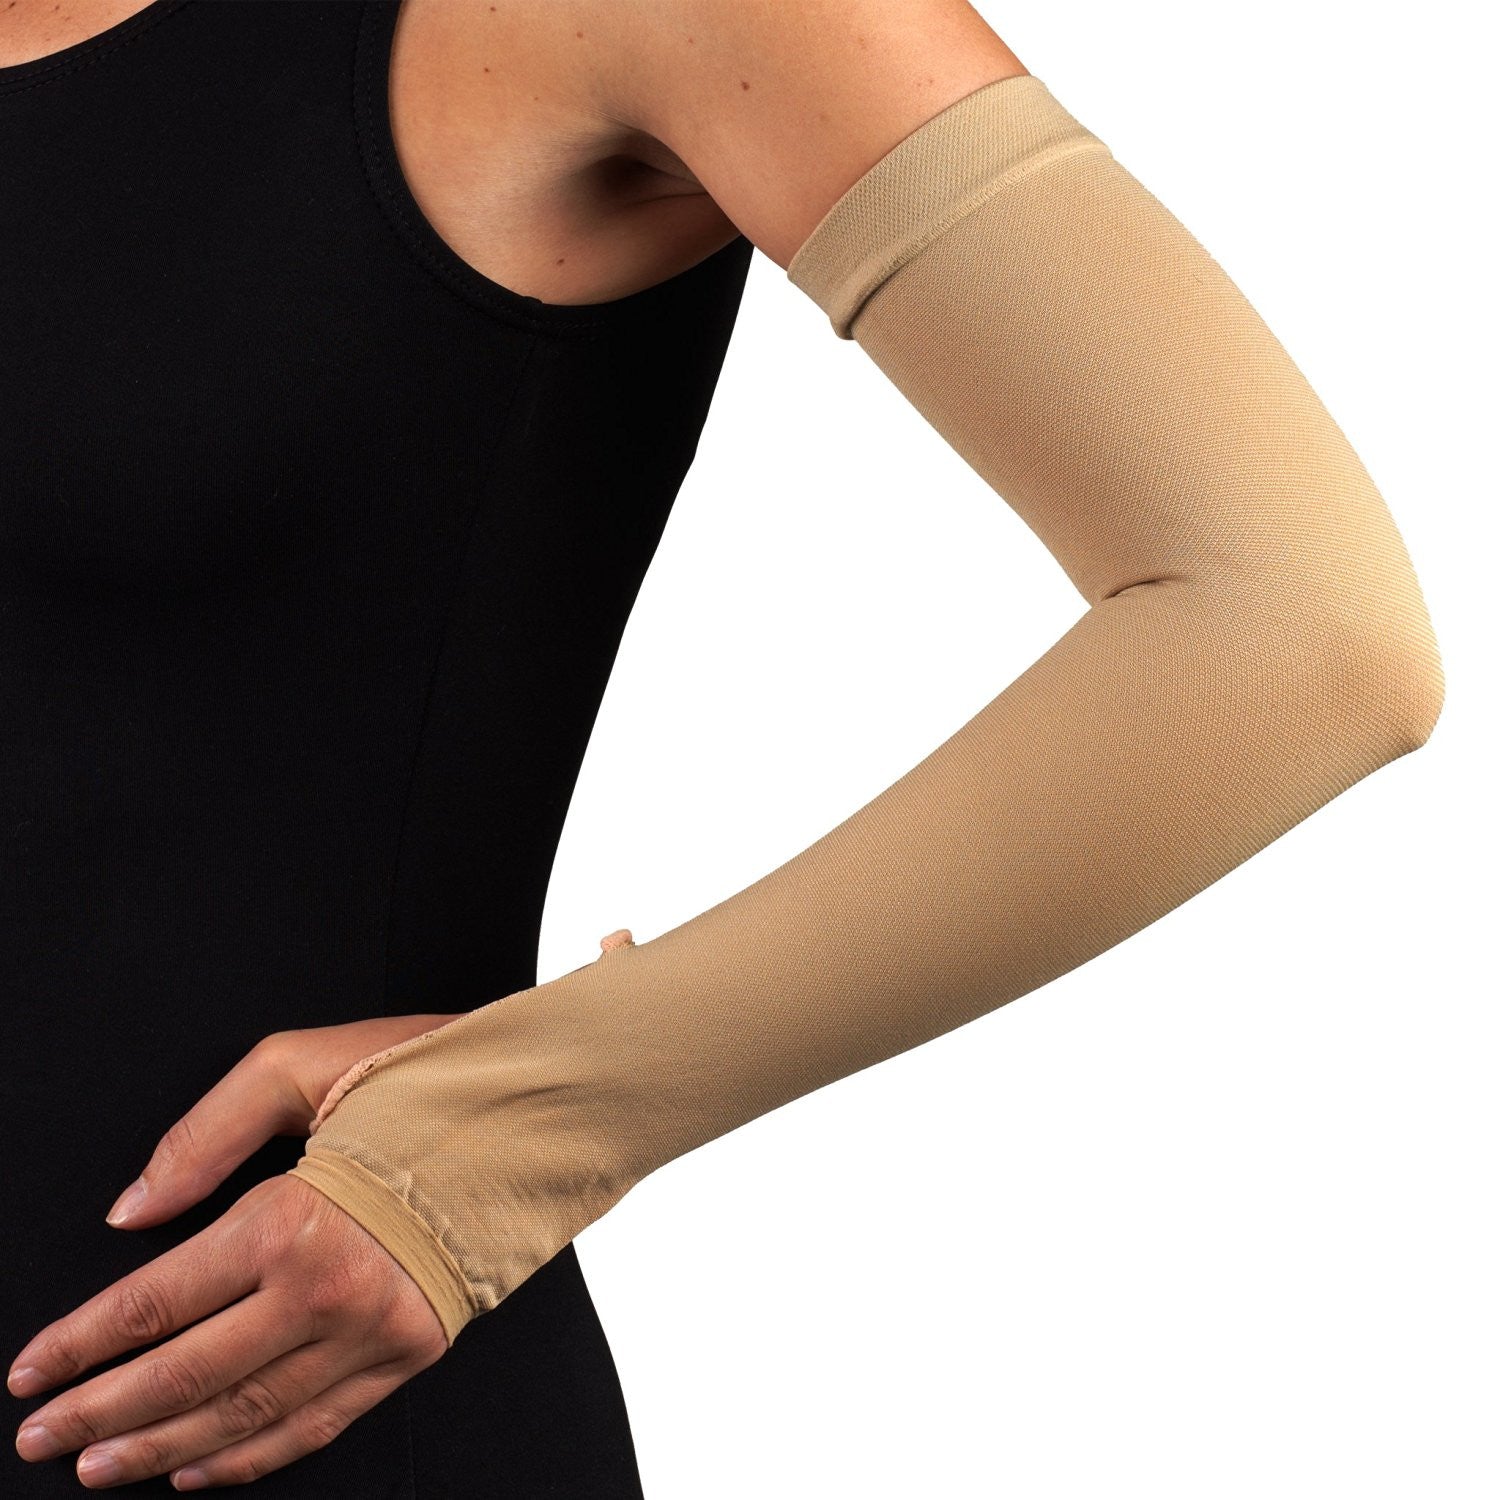 Compression Arm Sleeve with Gauntlet, Lymphedema Post-Op Support, Beig -  Home Medical Supply